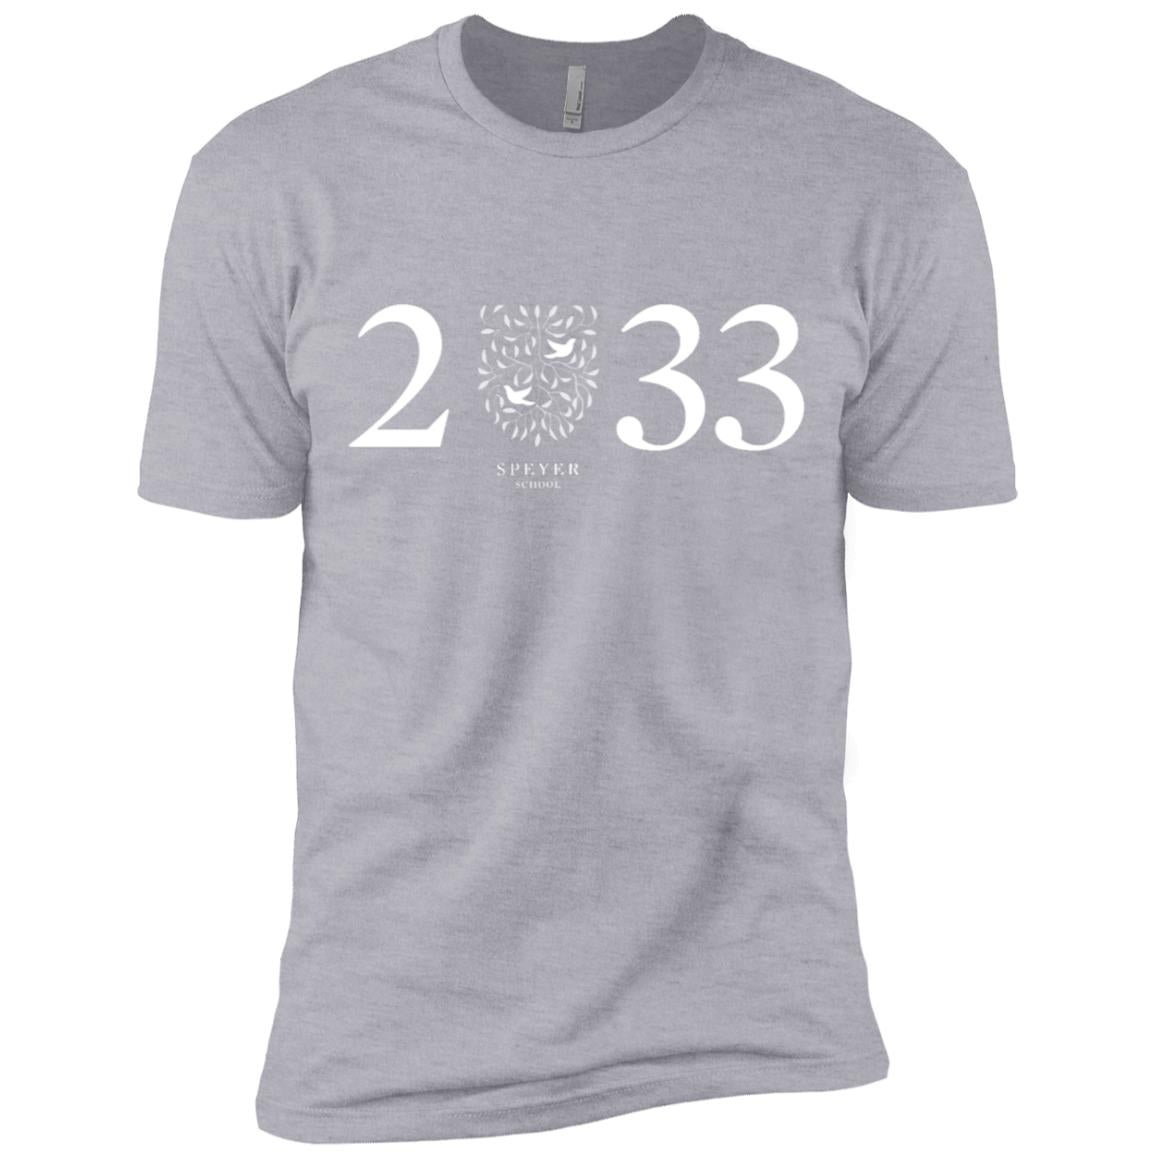 Class of 2033 T-Shirt, Youth Sizes